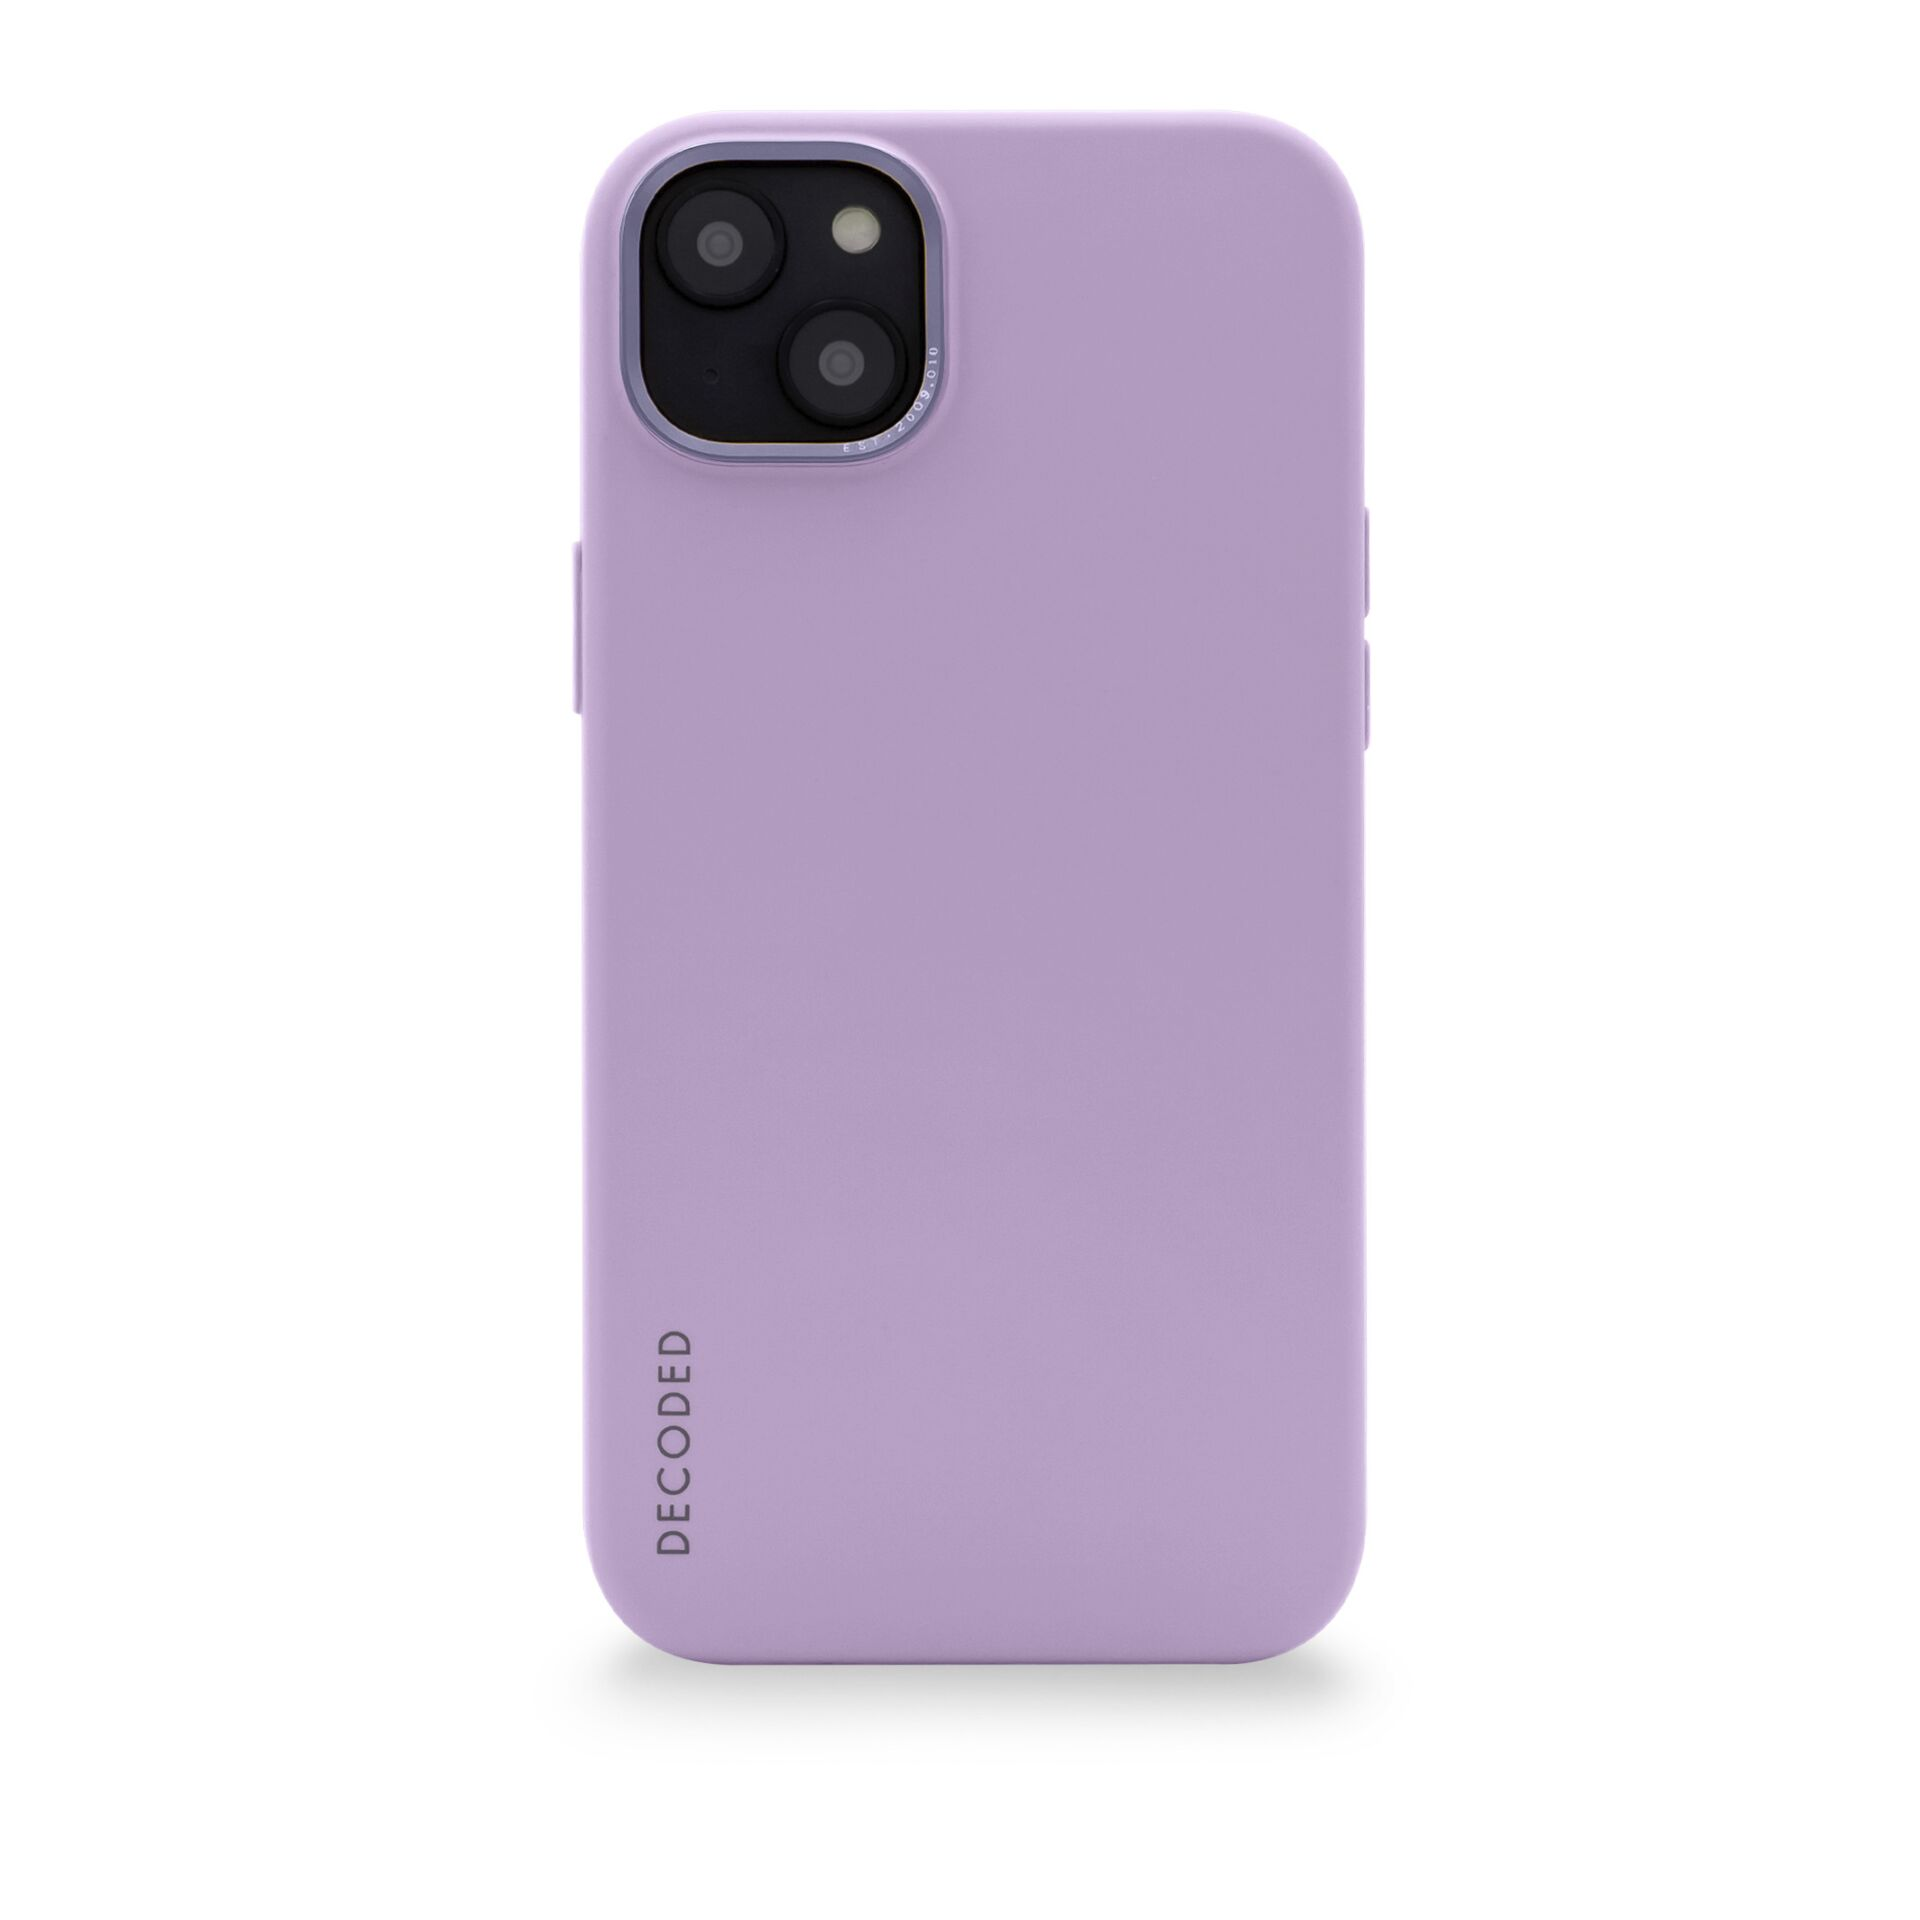 Backcover, Apple, 14 Silicone Plus, Lavender, iPhone AntiMicrobial Lavender DECODED Backcover